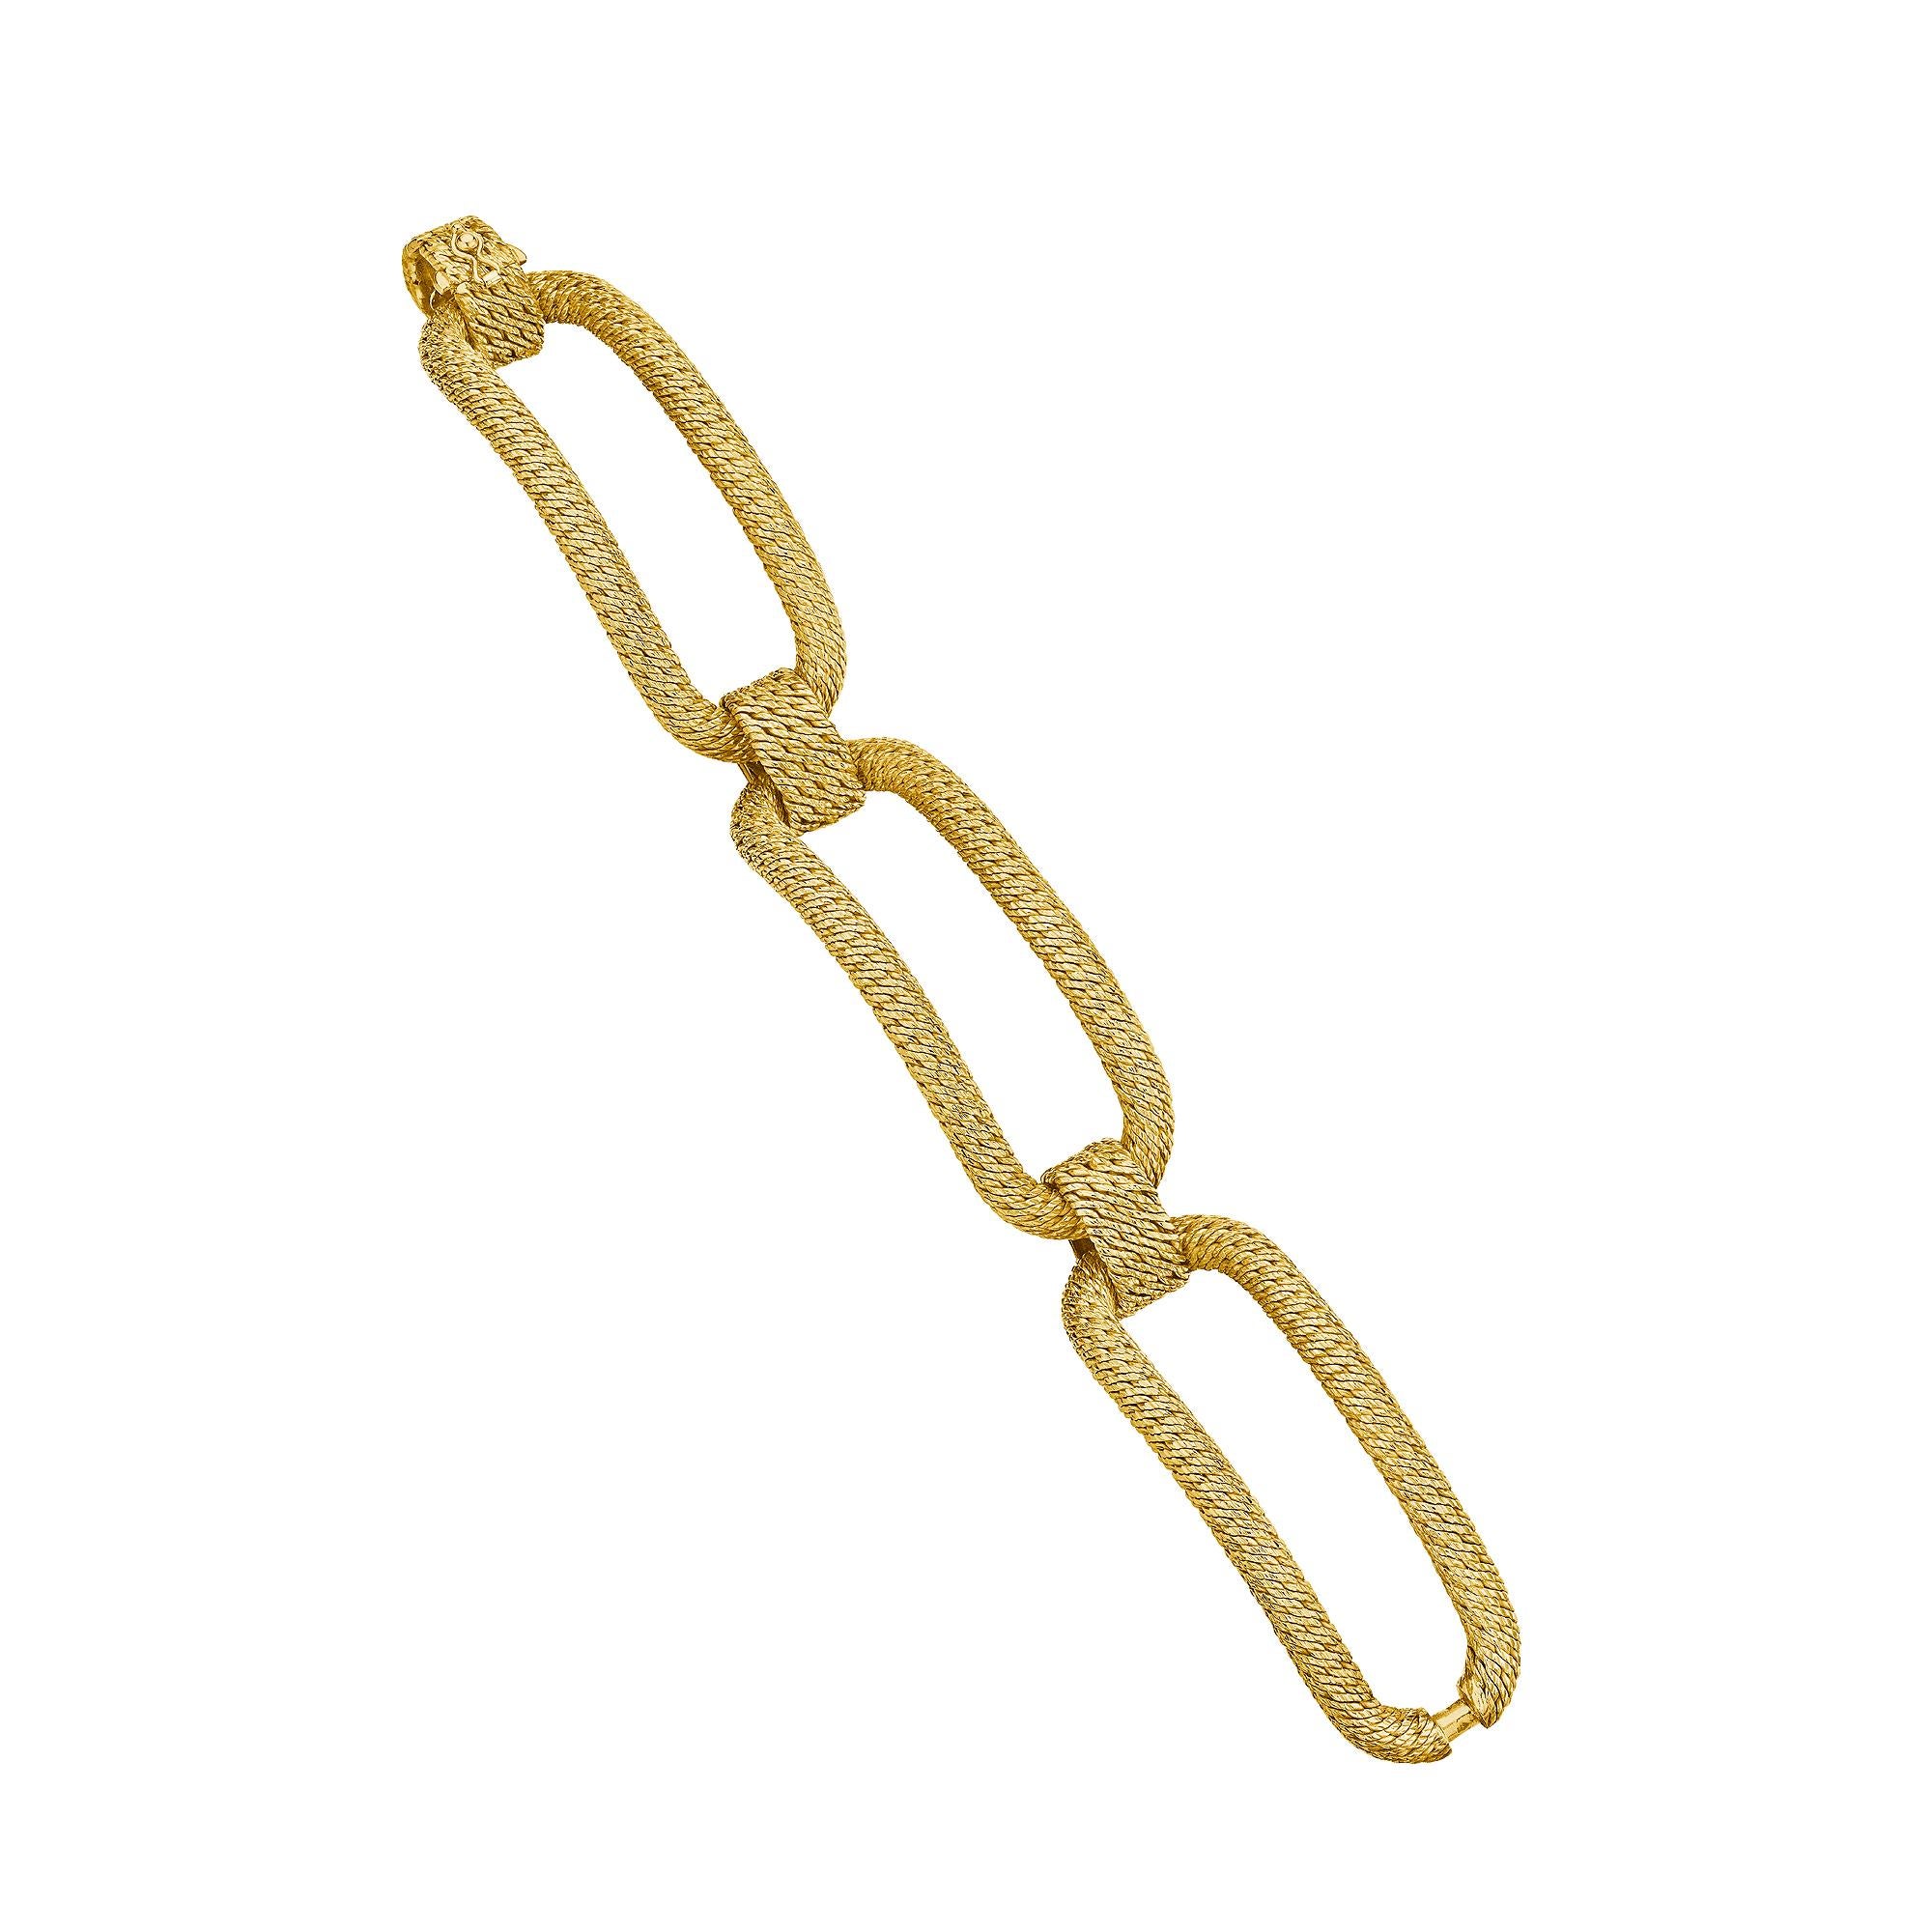 Appearing as though it was woven from spun gold, this Tiffany & Co. Paris George L'Enfant modernist textured long link bracelet is simply sublime.  The three elongated mesh patterned links are designed to comfortably hug your wrist with a graceful